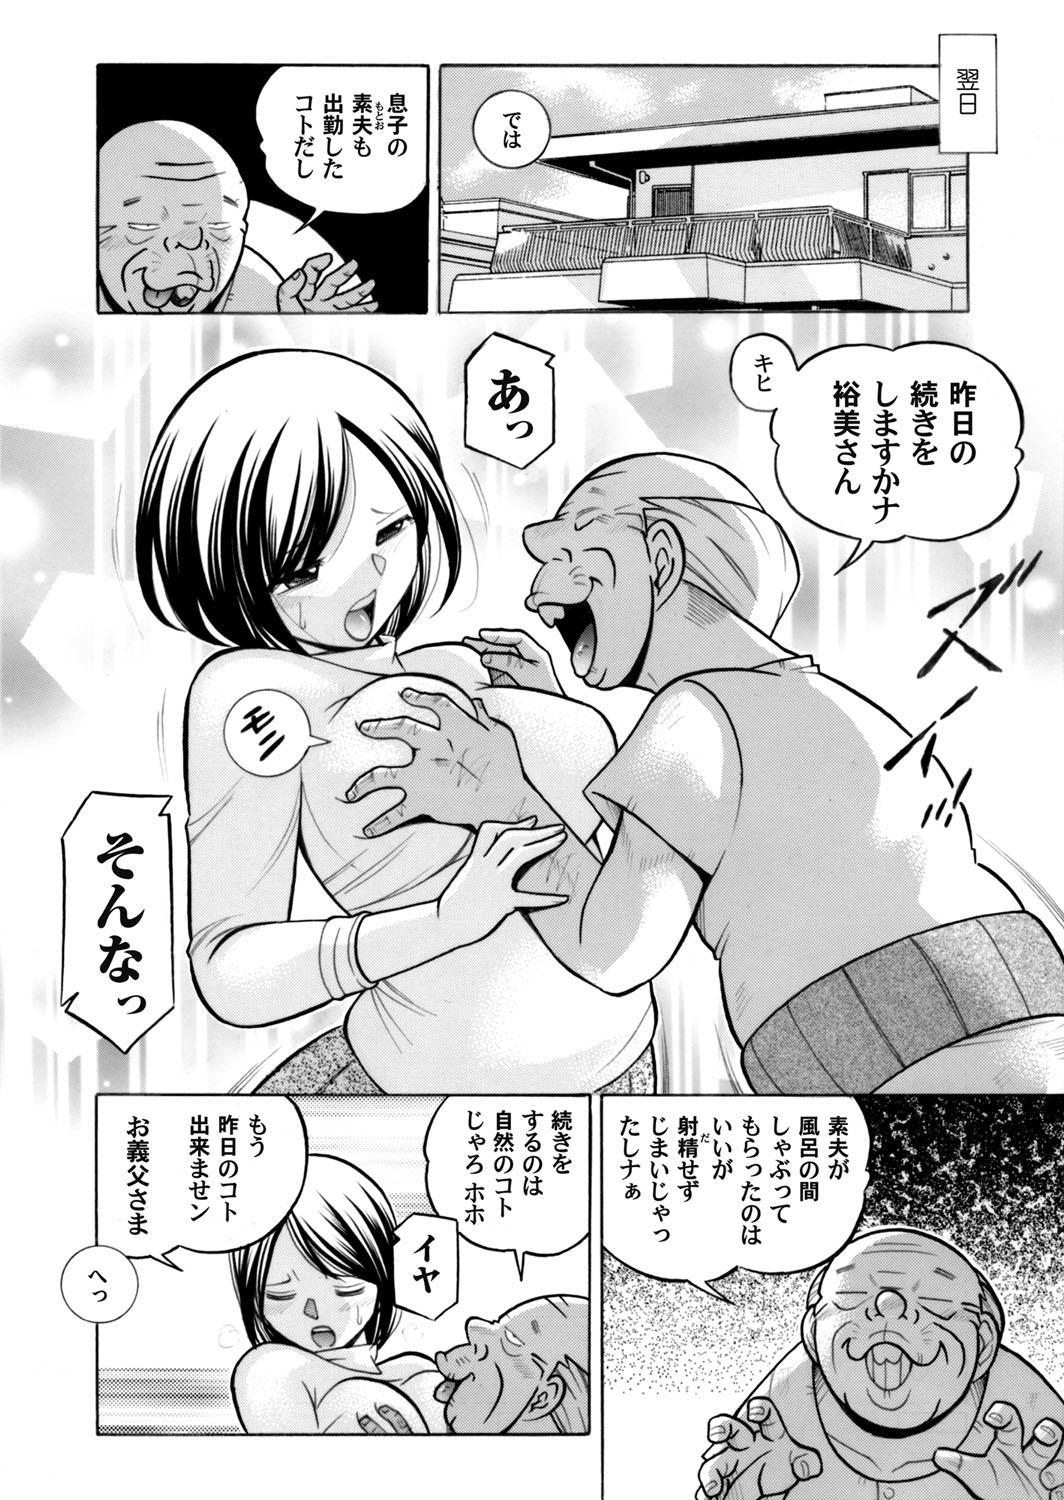 Delicia COMIC Magnum Vol. 67 Point Of View - Page 3